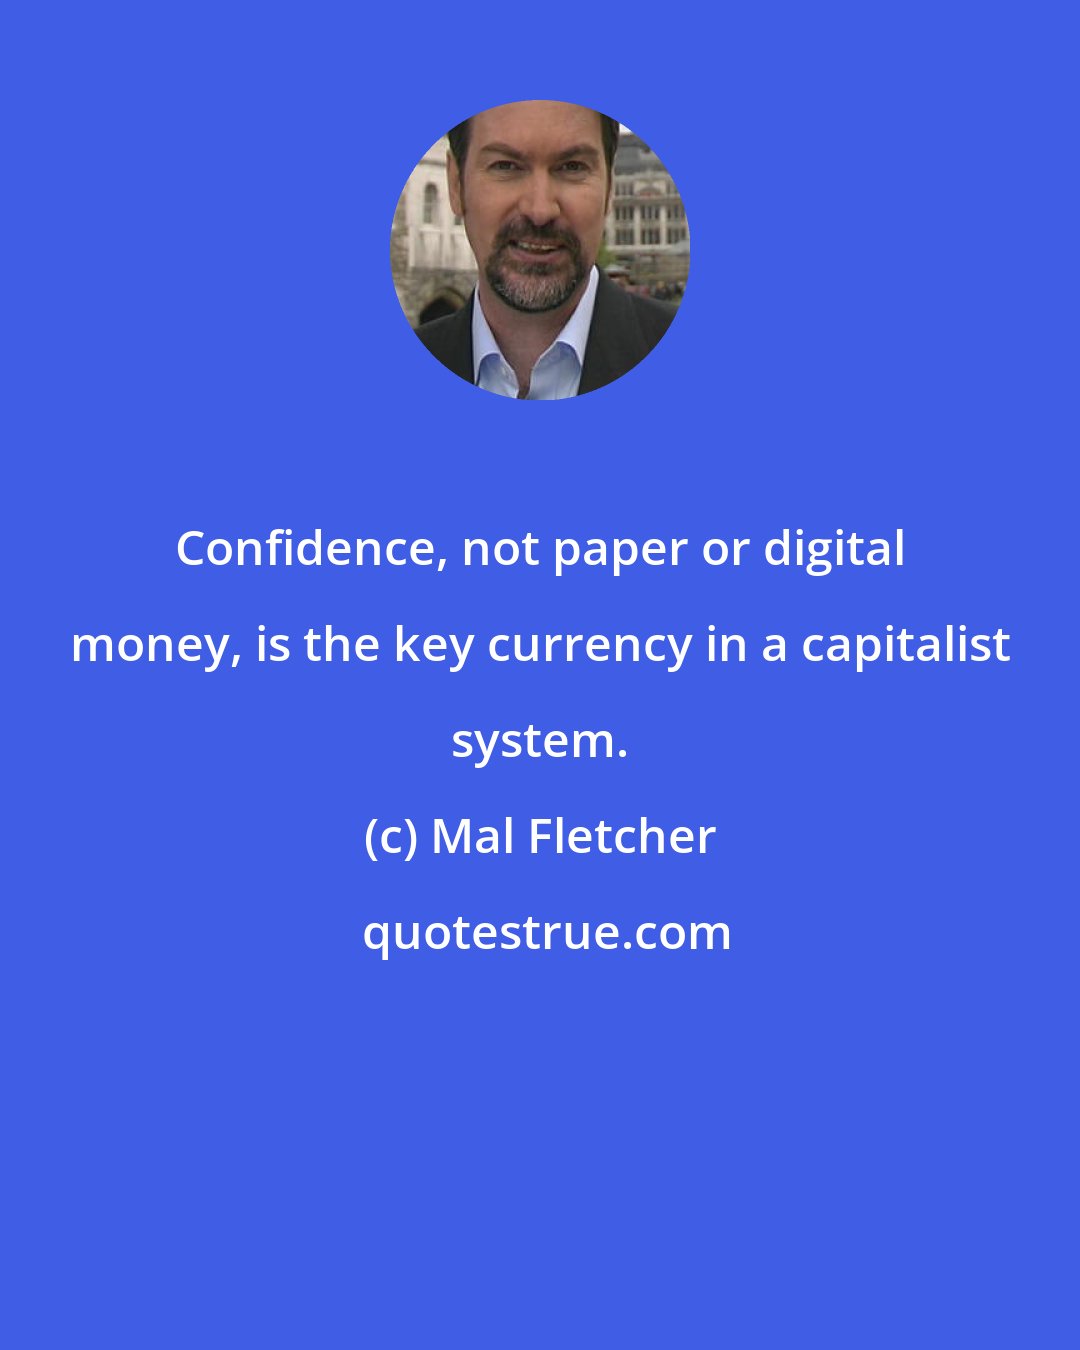 Mal Fletcher: Confidence, not paper or digital money, is the key currency in a capitalist system.